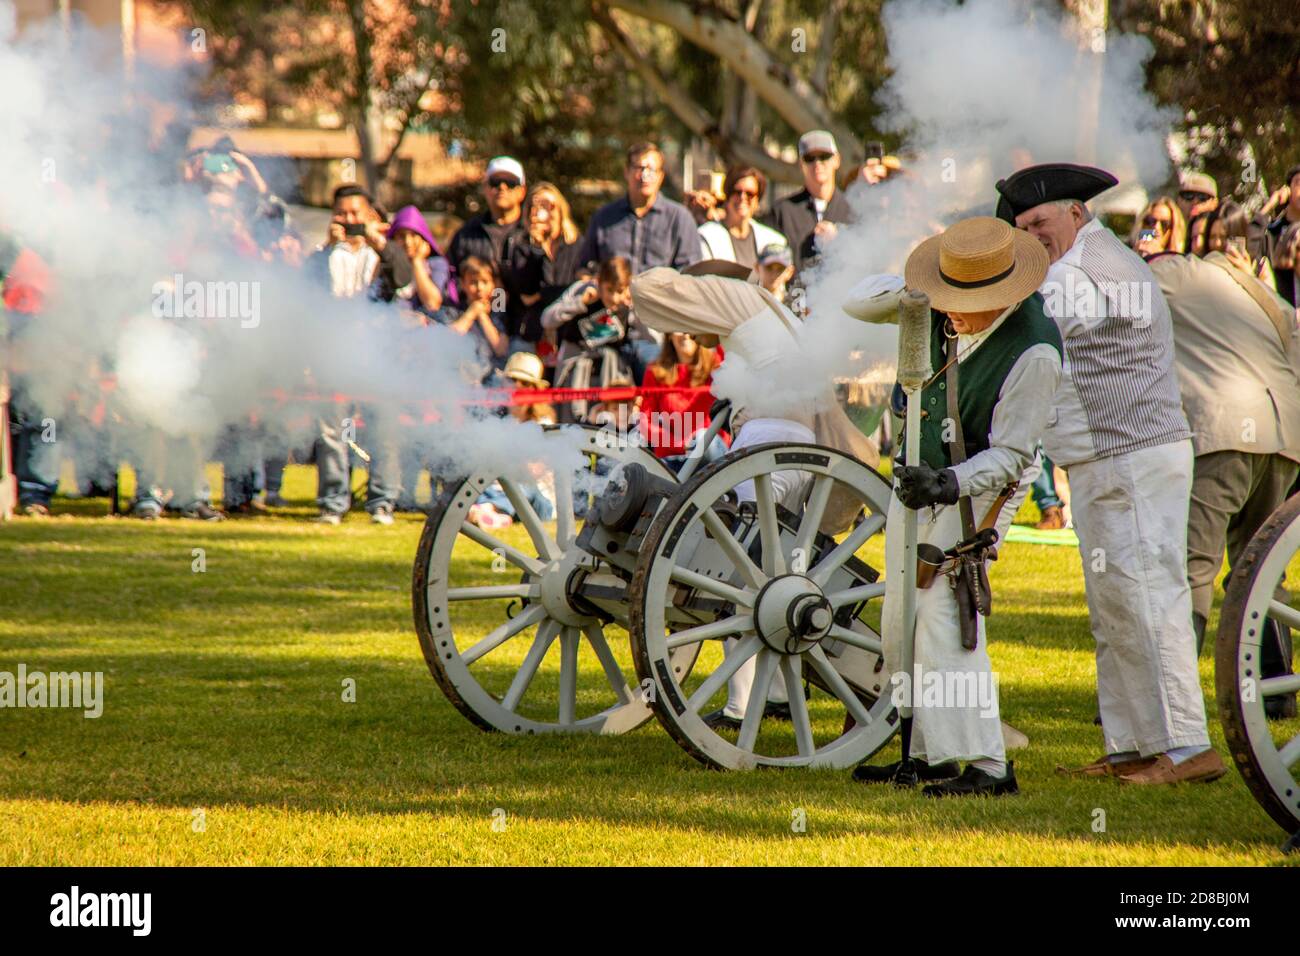 A rebel canon fires as actors portray an artillery crew before an attentive audience at a historical reenactment of an American Revolutionary War batt Stock Photo